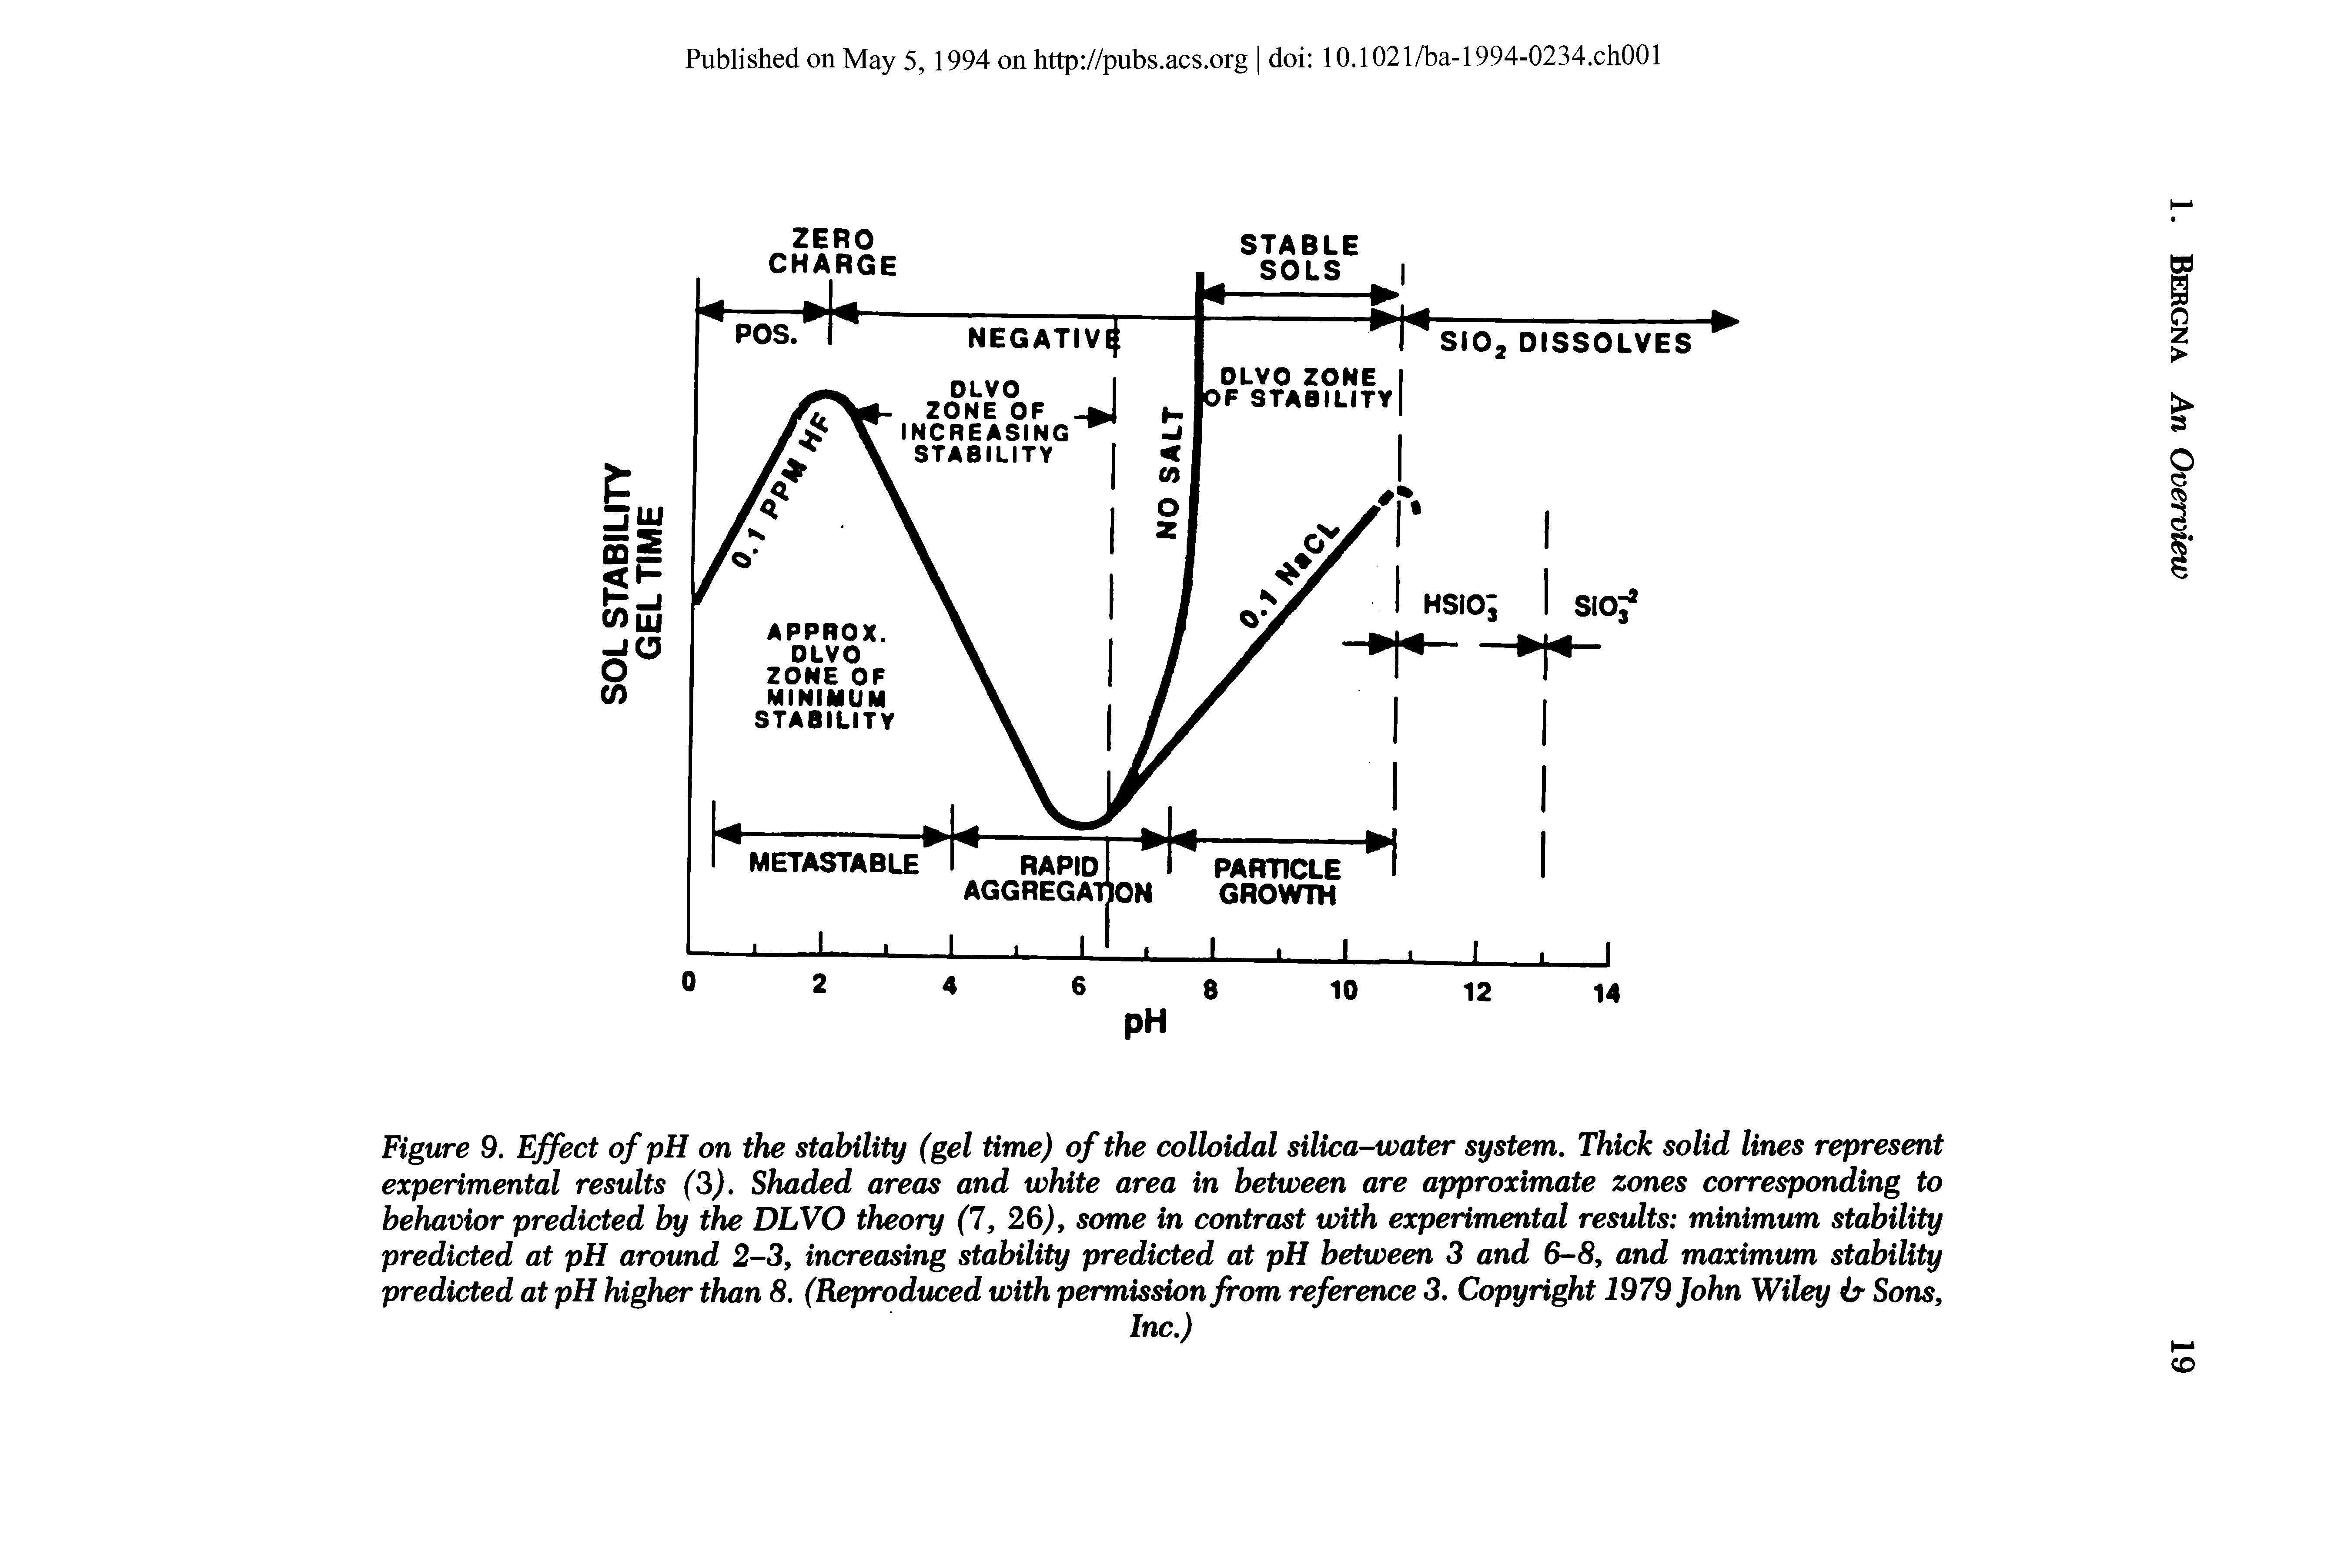 Figure 9. Effect of pH on the stability (gel time) of the colloidal silica-water system. Thick solid lines represent experimental results (3). Shaded areas and white area in between are approximate zones corresponding to behavior predicted by the DLVO theory (1, 26), some in contrast with experimental results minimum stability predicted at pH around 2-3, increasing stability predicted at pH between 3 and 6-8, and maximum stability predicted at pH higher than 8. (Reproduced with permission from reference 3. Copyright 1979 John Wiley ir Sons,...